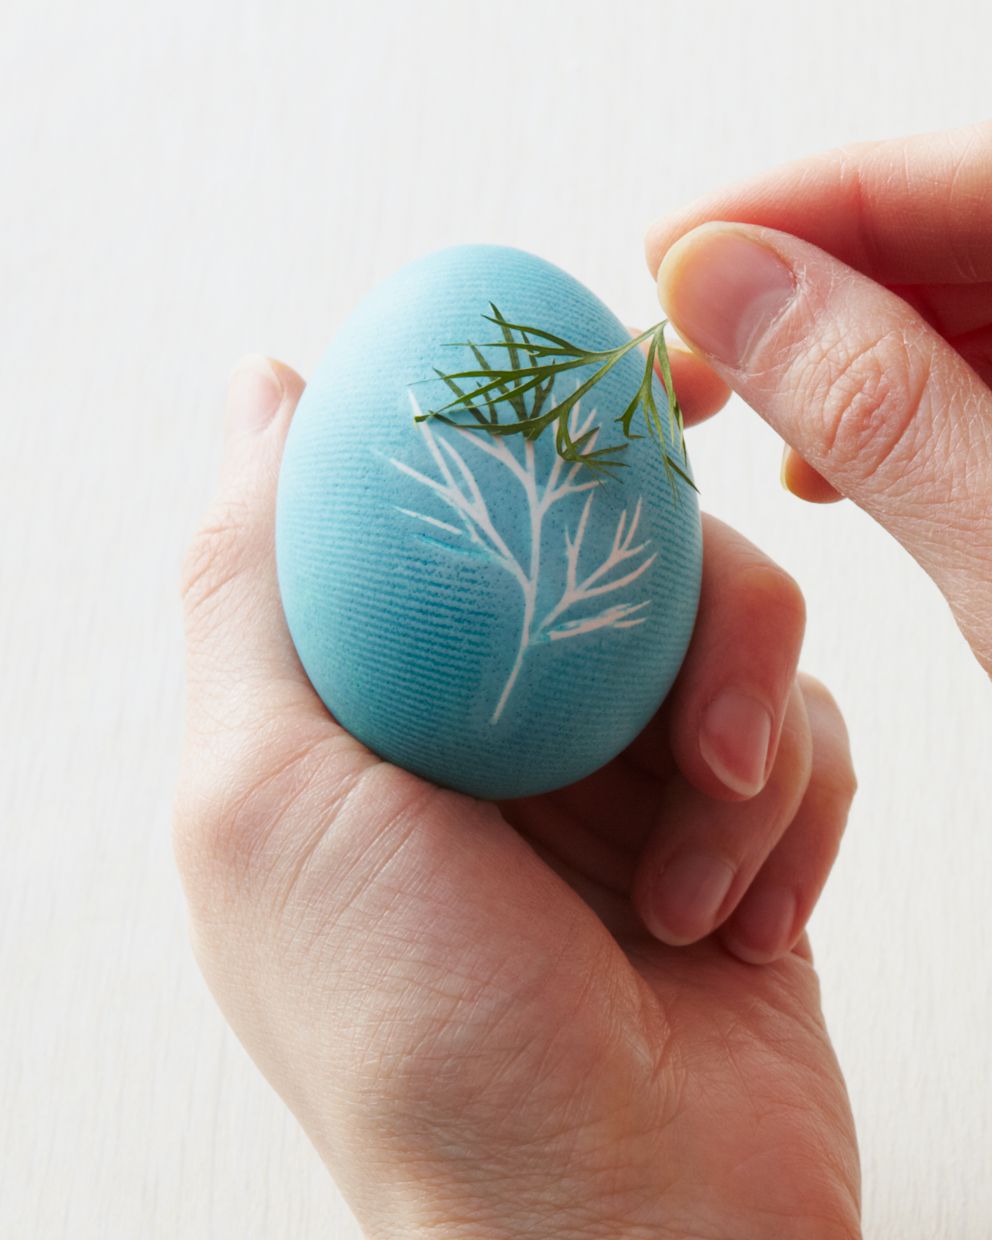 Masking Eggs with Tape and Leaves